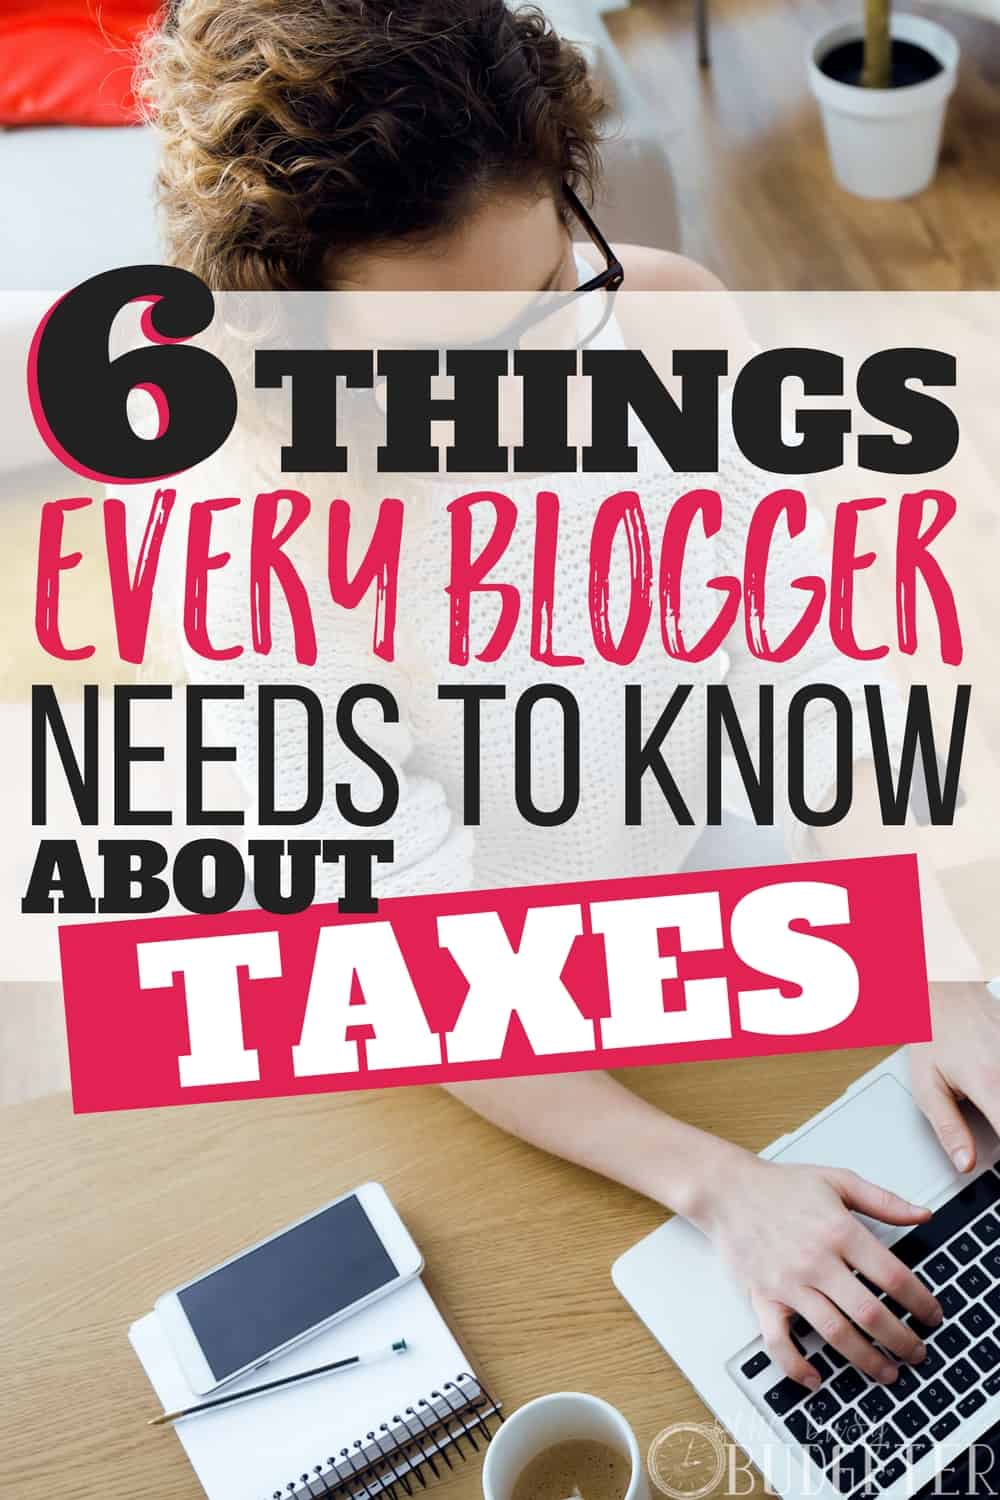 Taxes were the number one thing that frustrated and confused me most when I started blogging. This article was SO helpful and had so much information on doing your taxes right! Every blogger needs to read this!!